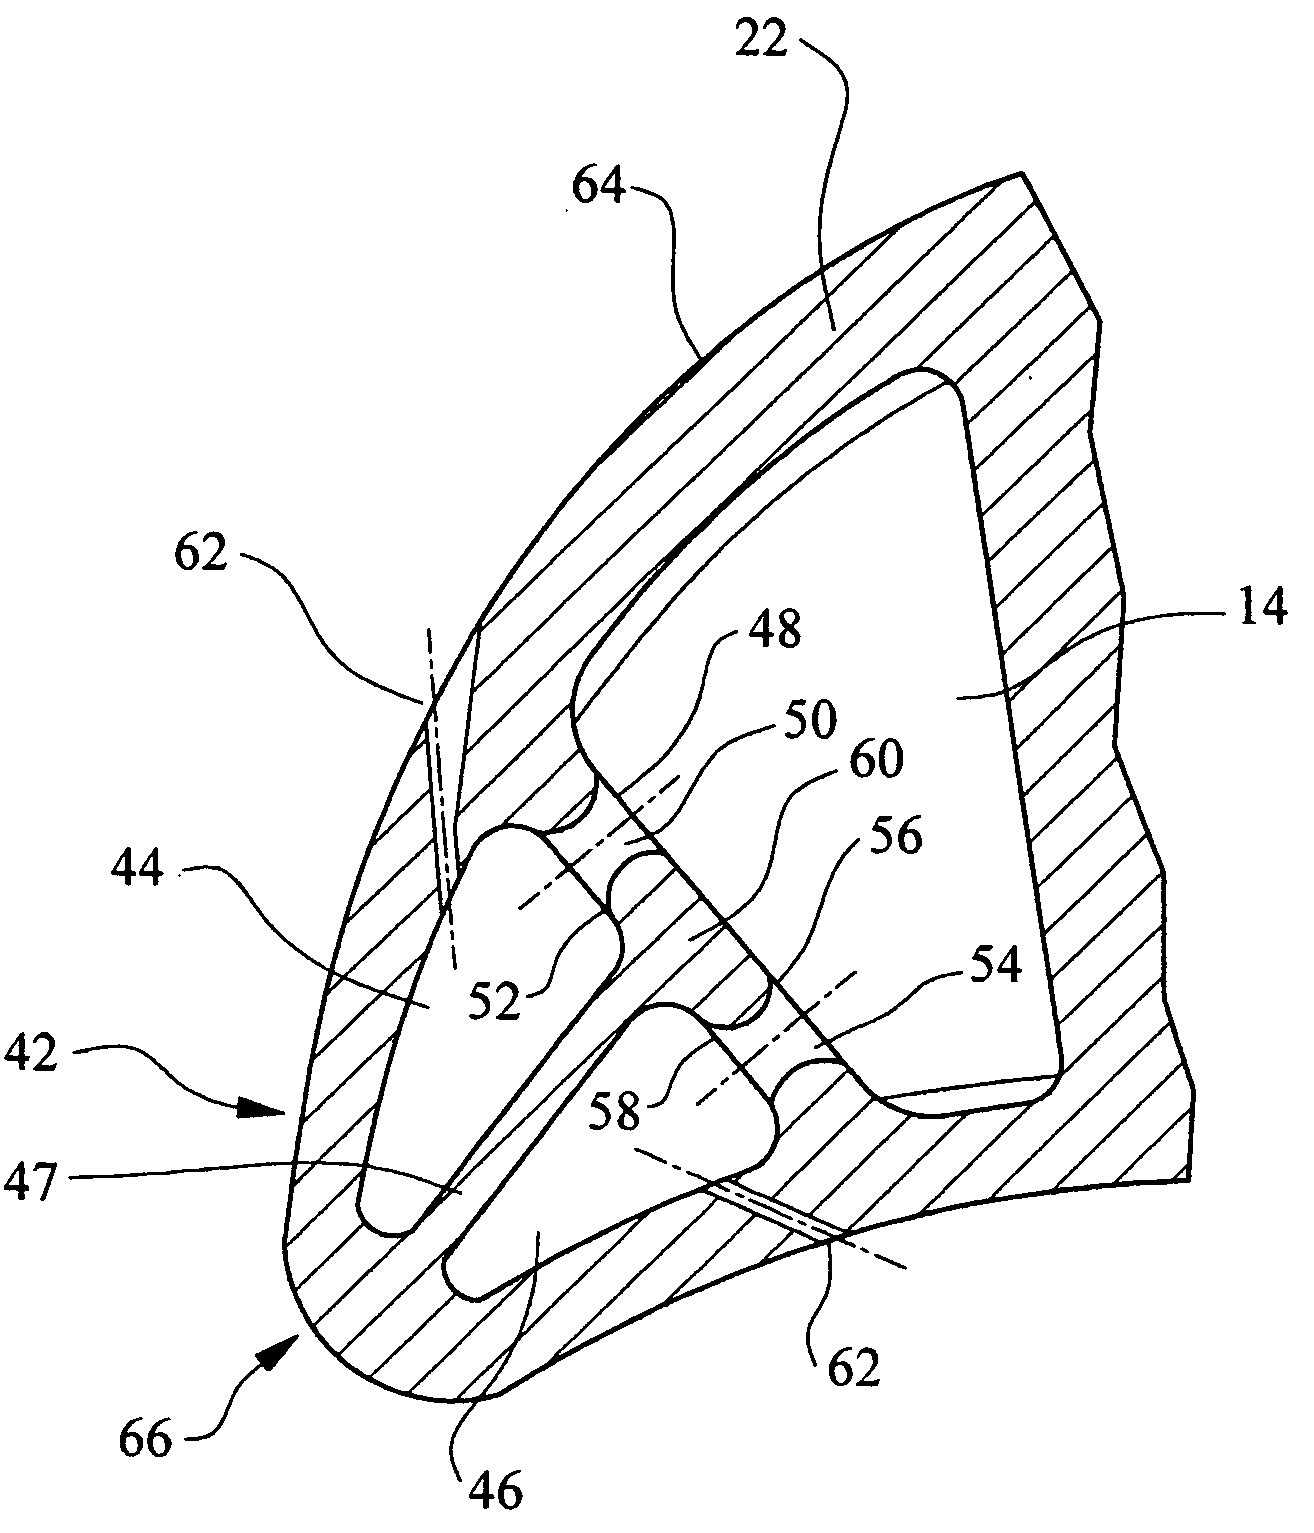 Impingement cooling system for a turbine blade